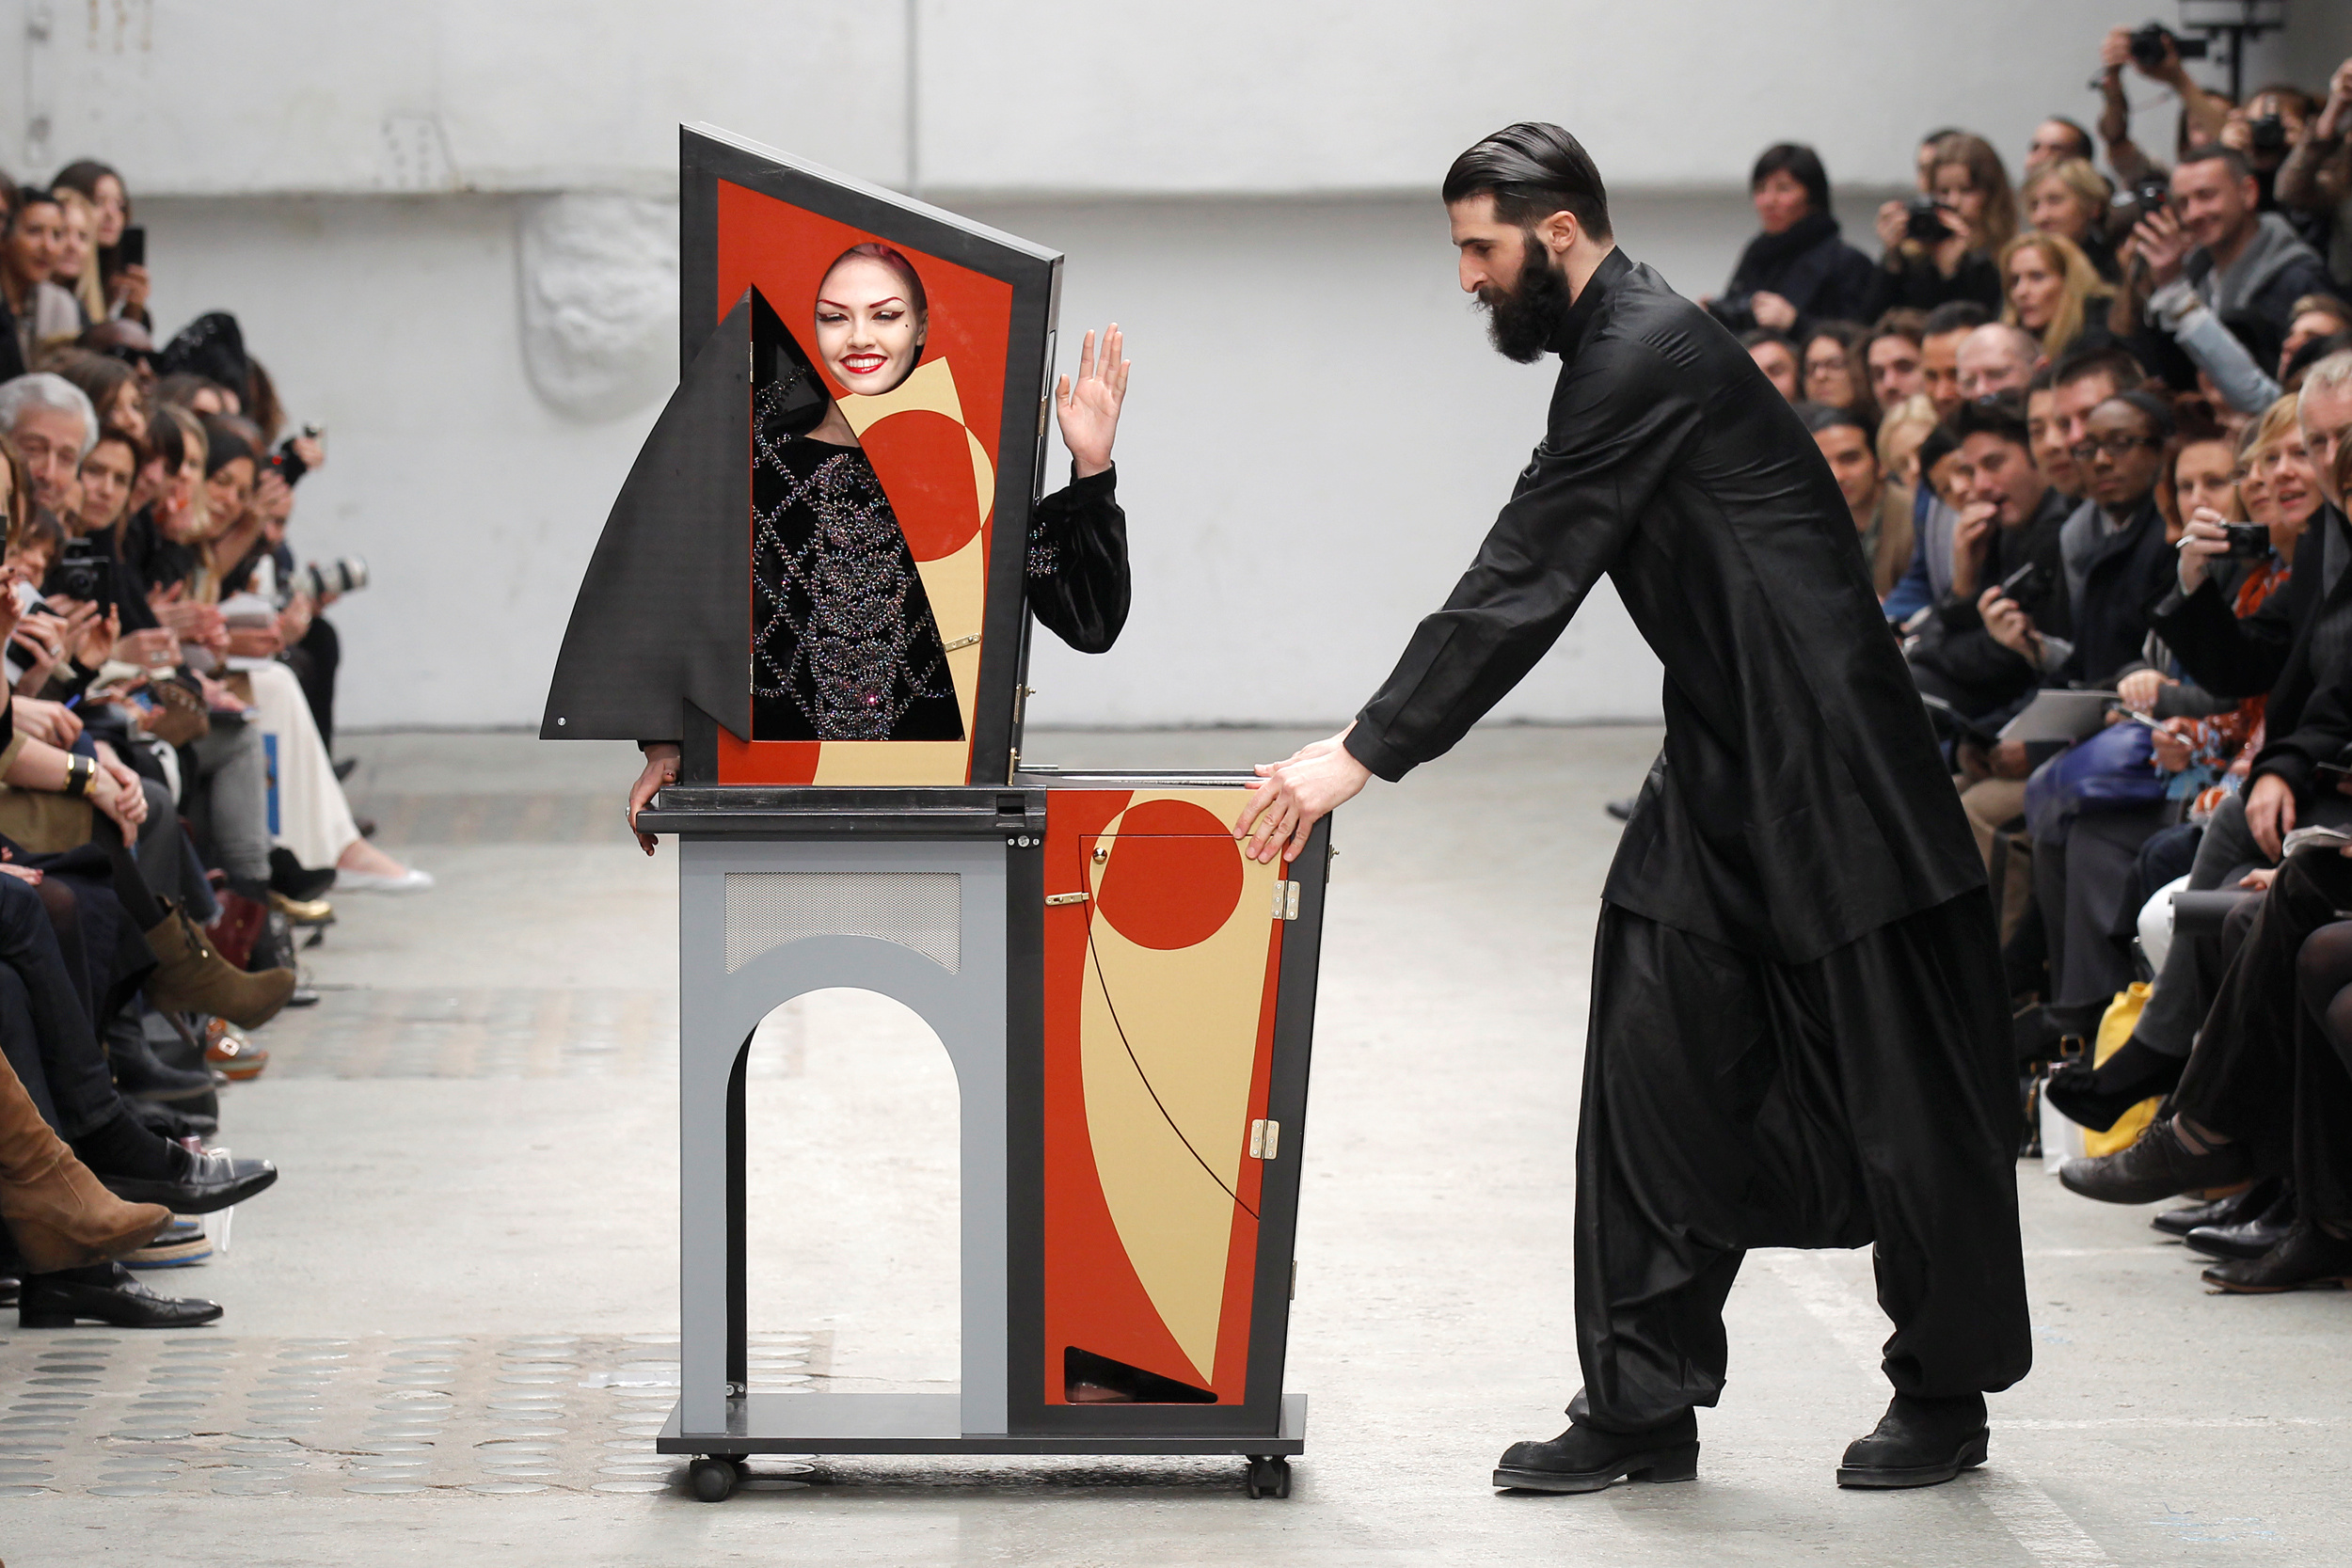 A magician performs with a model who presents a creation by Indian designer Manish Arora as part of his Fall-Winter 2011/2012 women's ready-to-wear fashion collection for French fashion house Guy Laroche during Paris Fashion Week